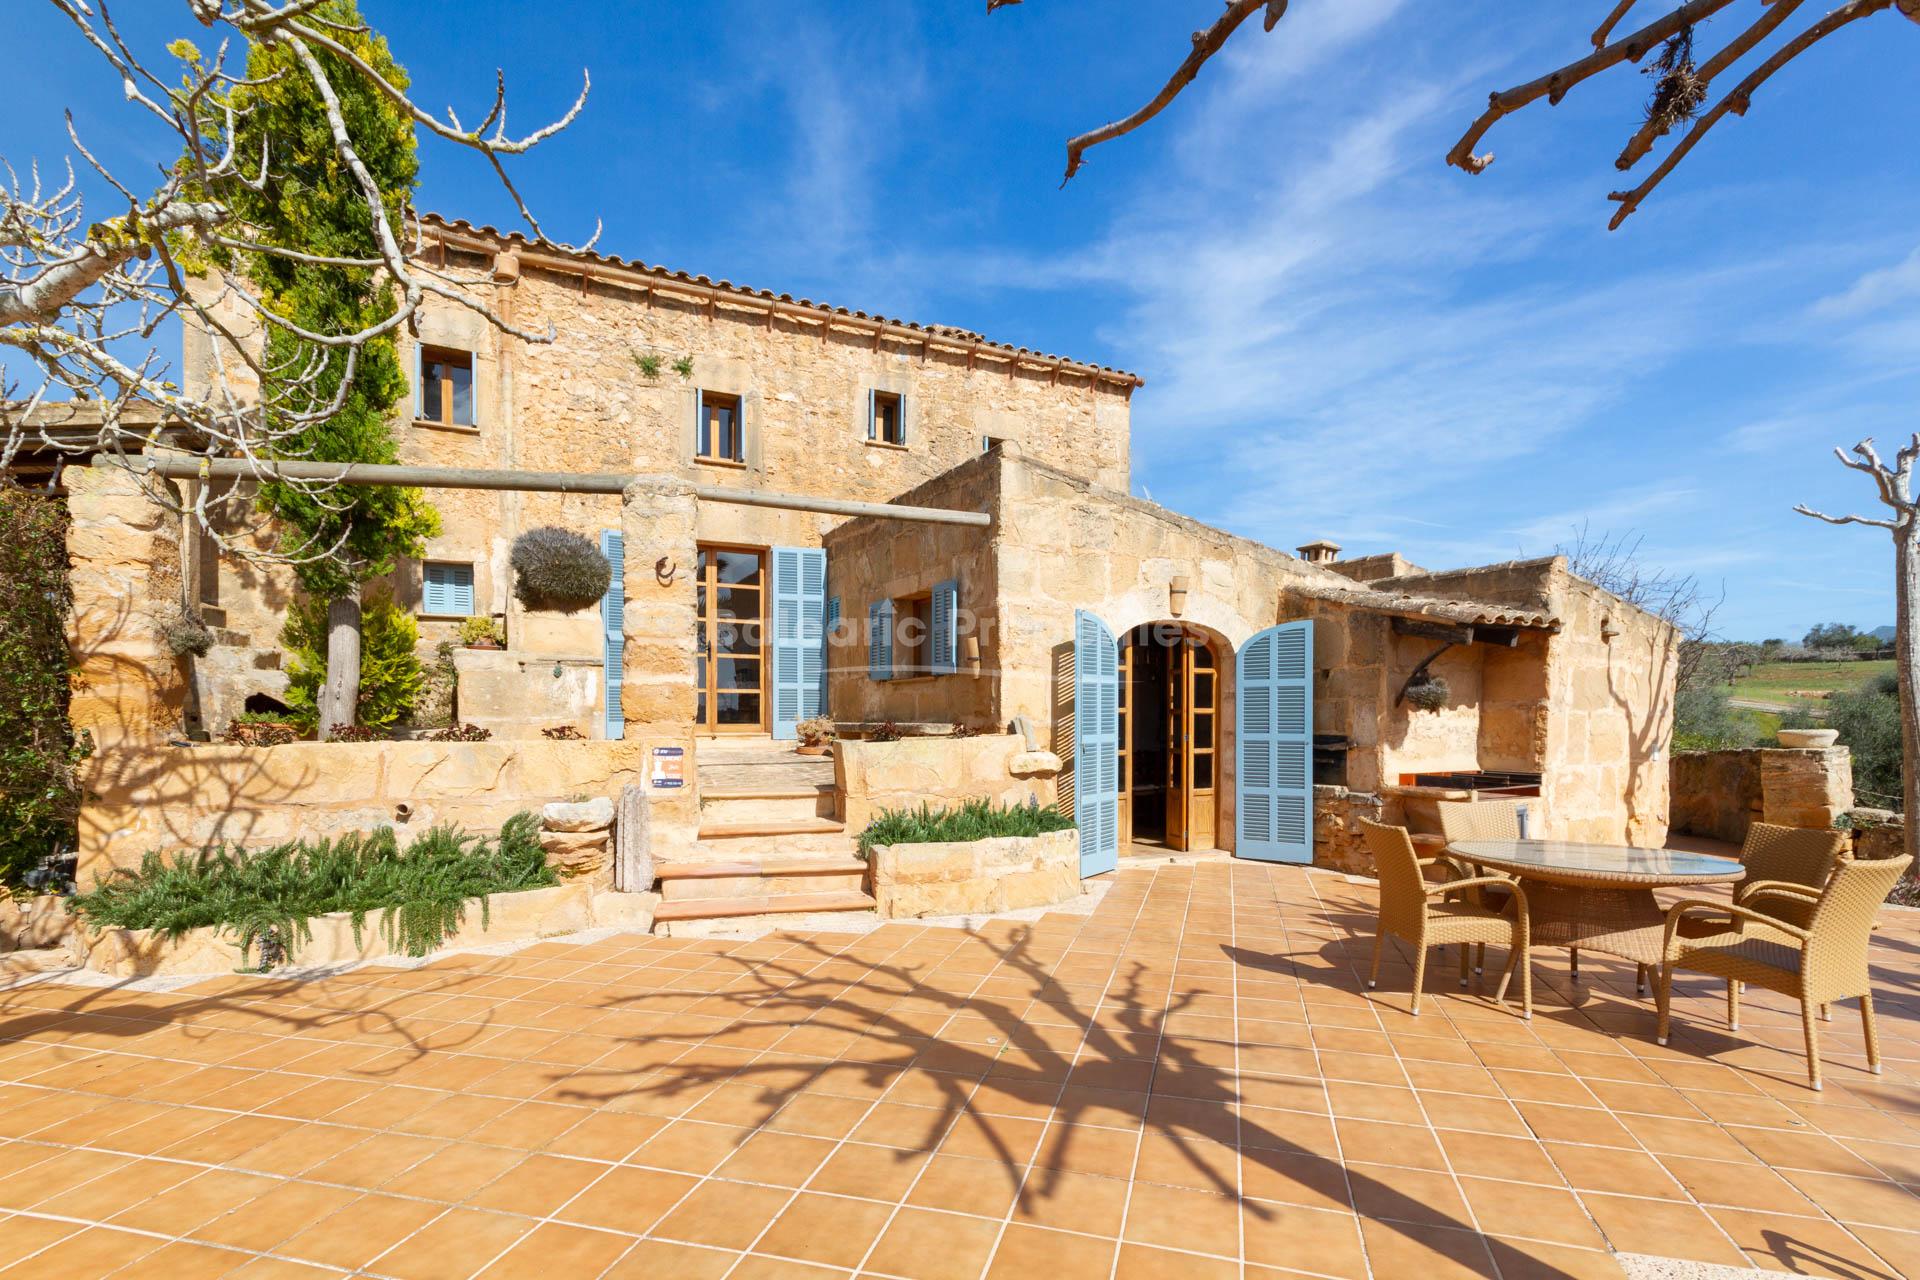 Renovated rustic finca with panoramic views for sale in Artá, Mallorca